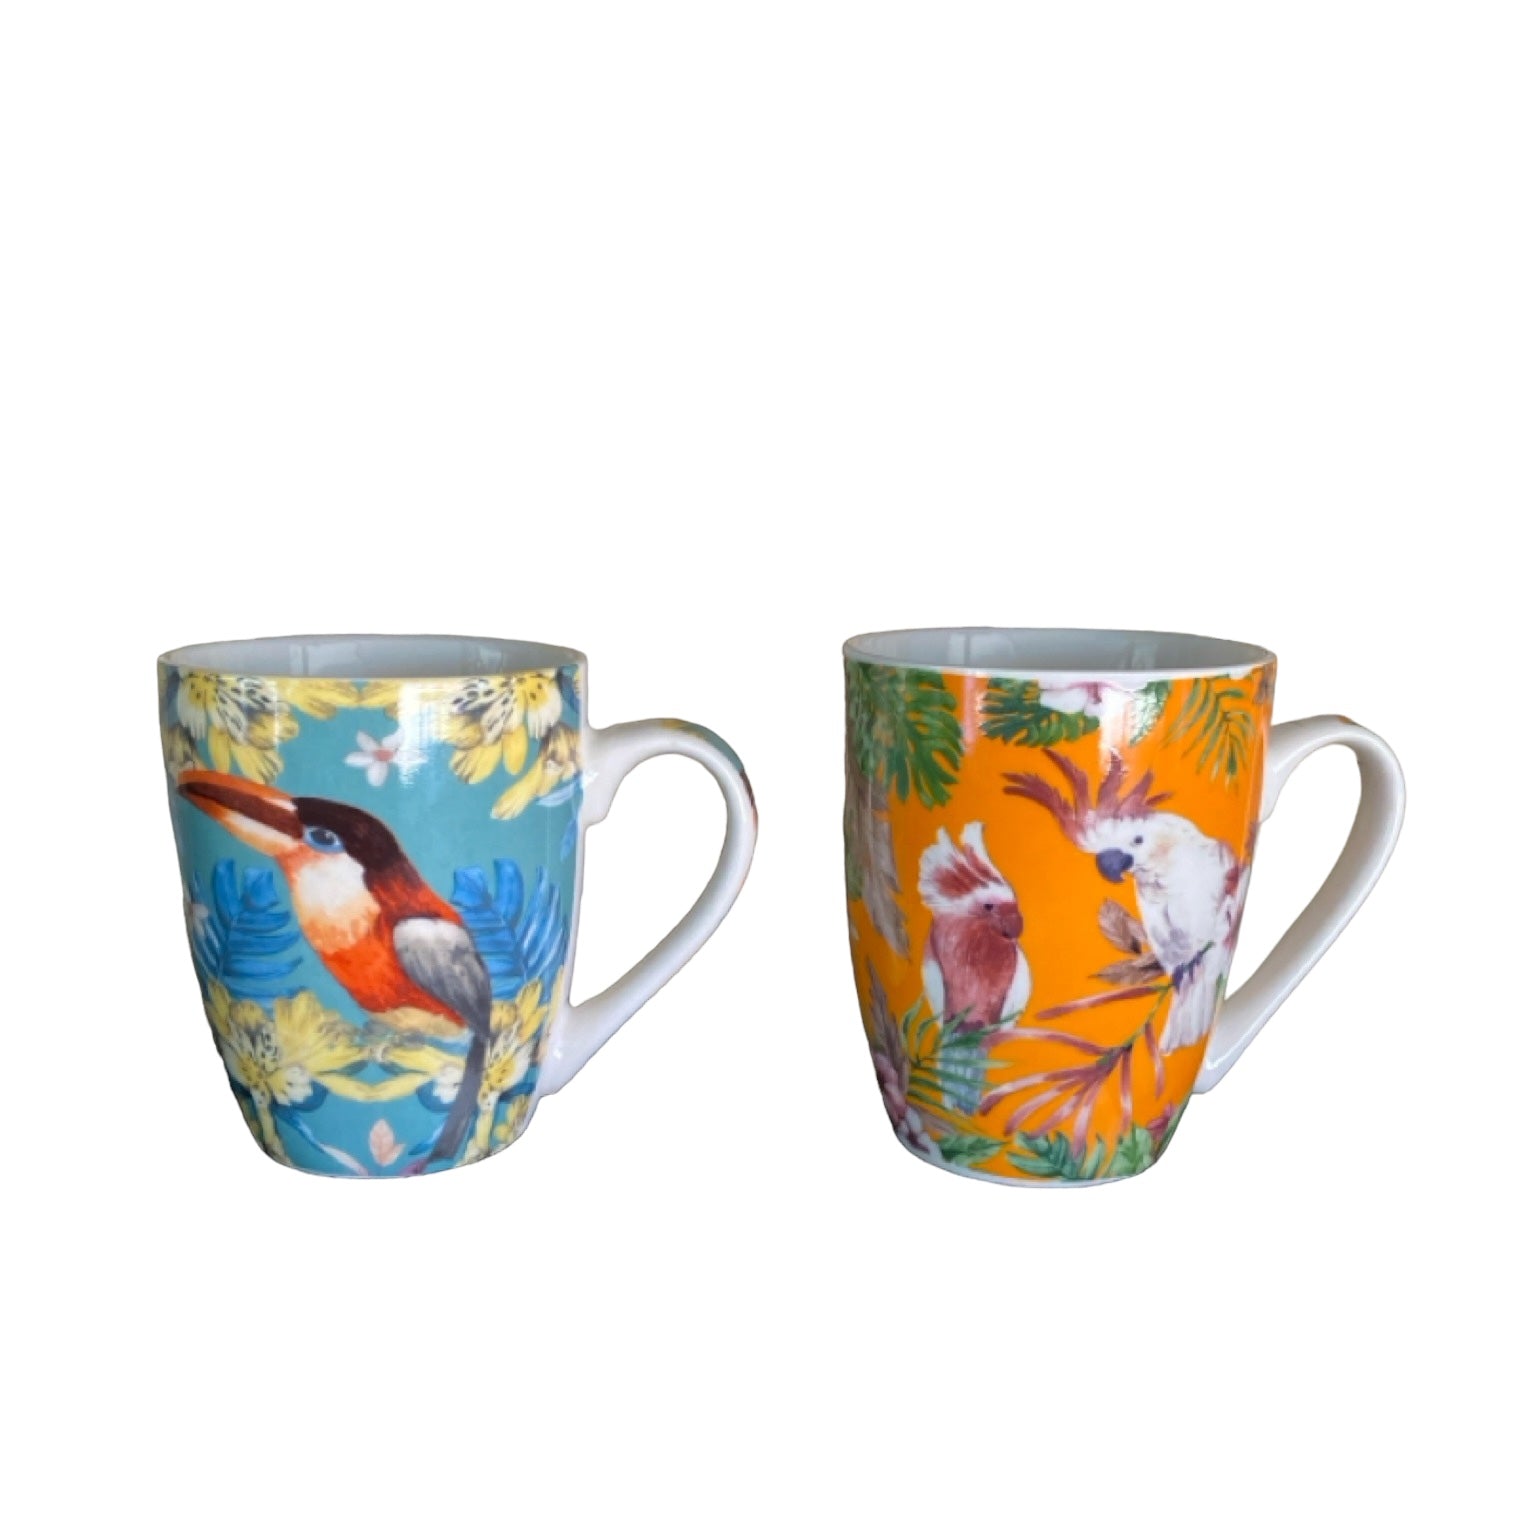 Cup Coffee Mug Set 4 Parrot Bird - The Renmy Store Homewares & Gifts 